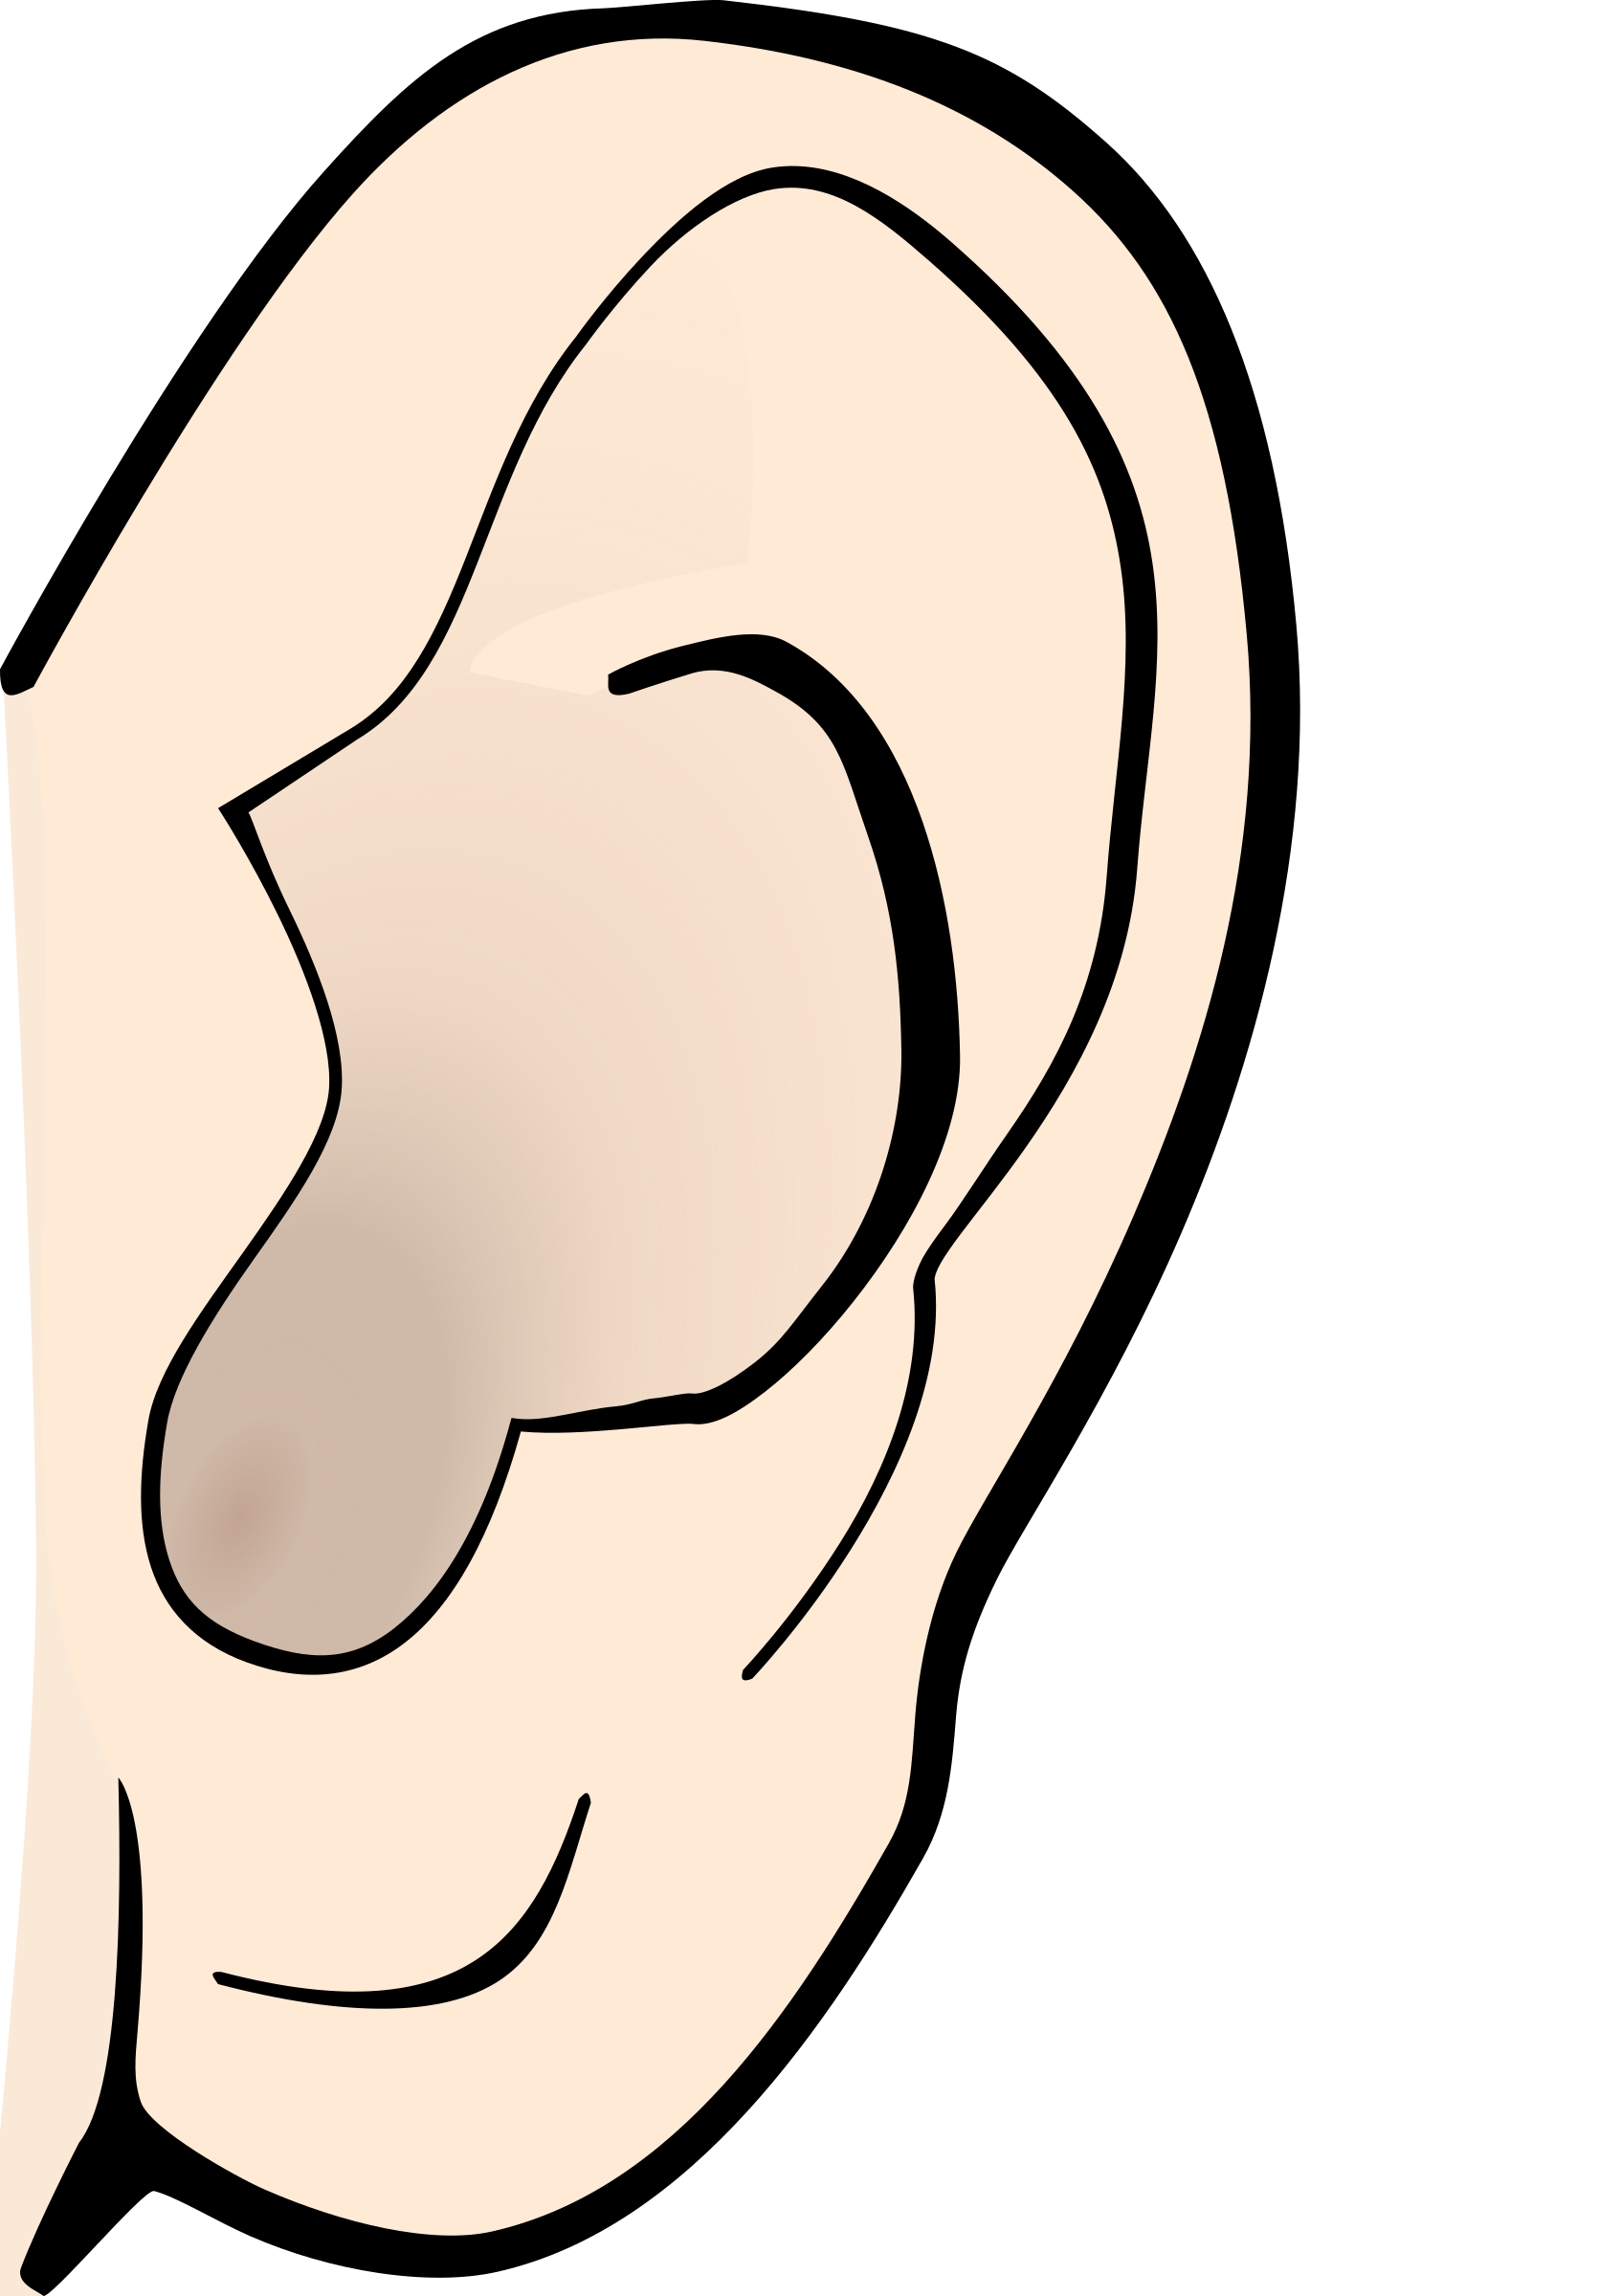 Ear PNG Image Background